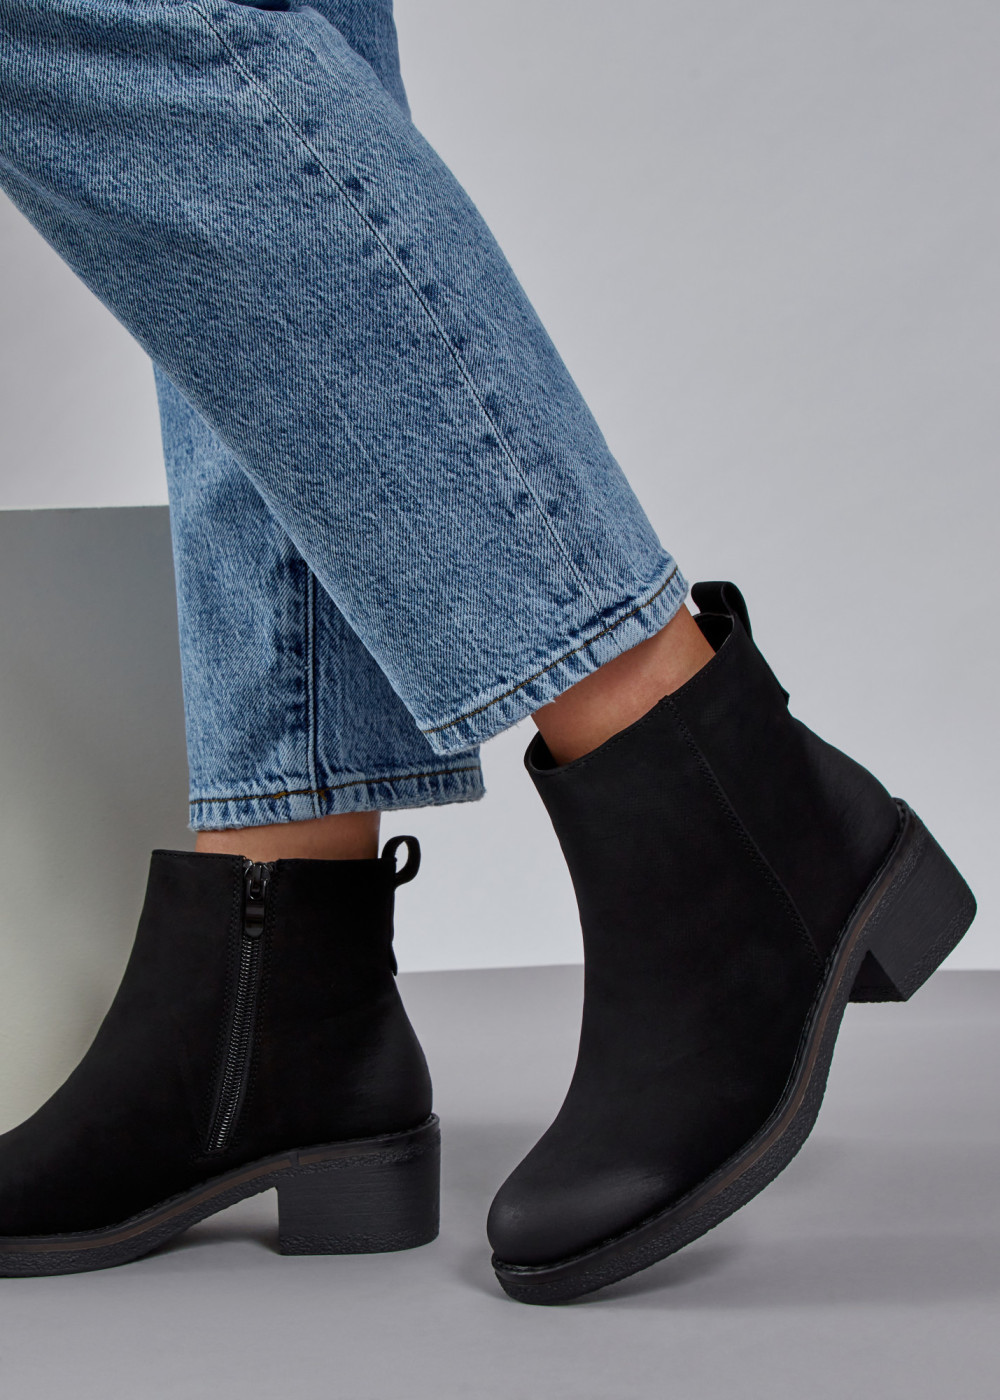 Black heeled ankle boots 4